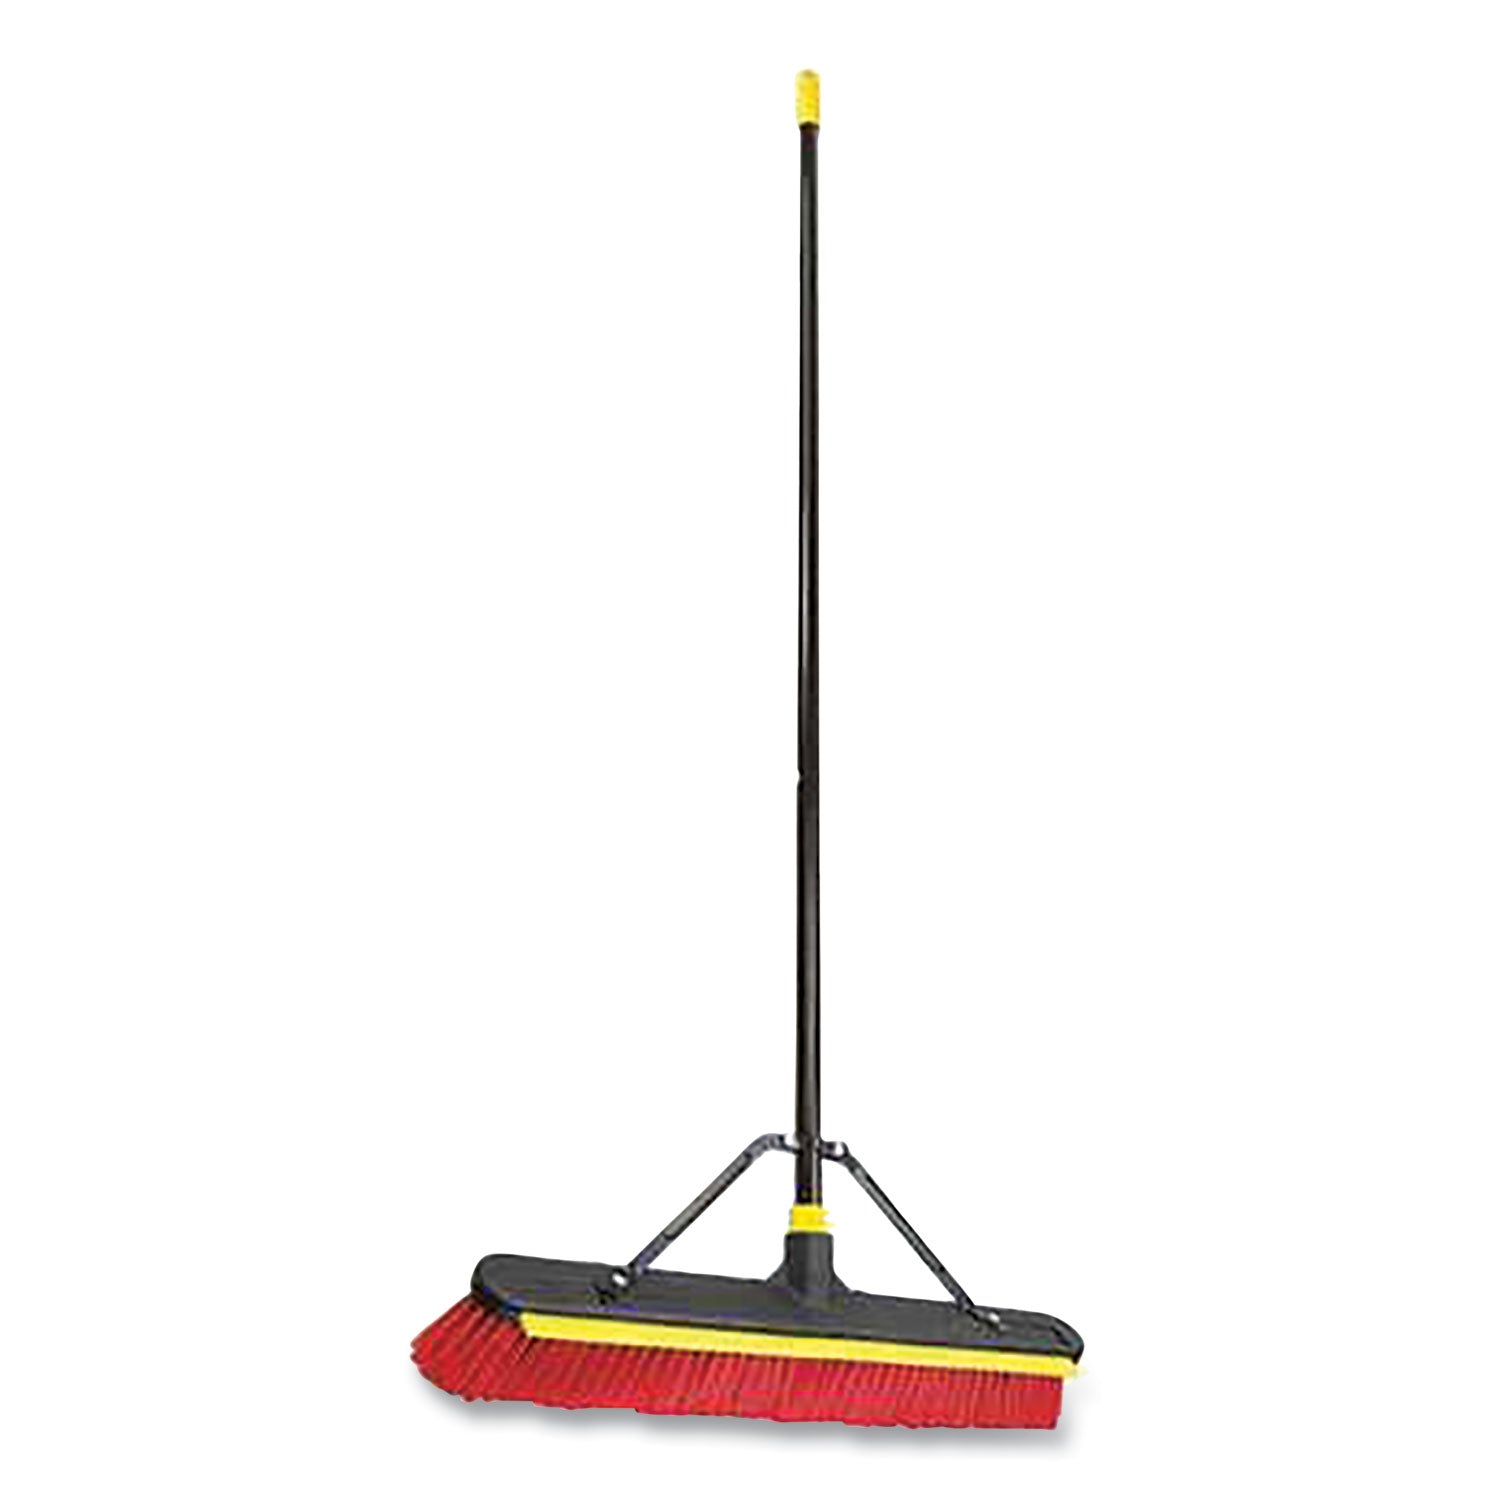 bulldozer-2-in-1-squeegee-pushbroom-24-x-54-pet-bristles-finished-steel-handle-black-red-yellow_qck635su - 1